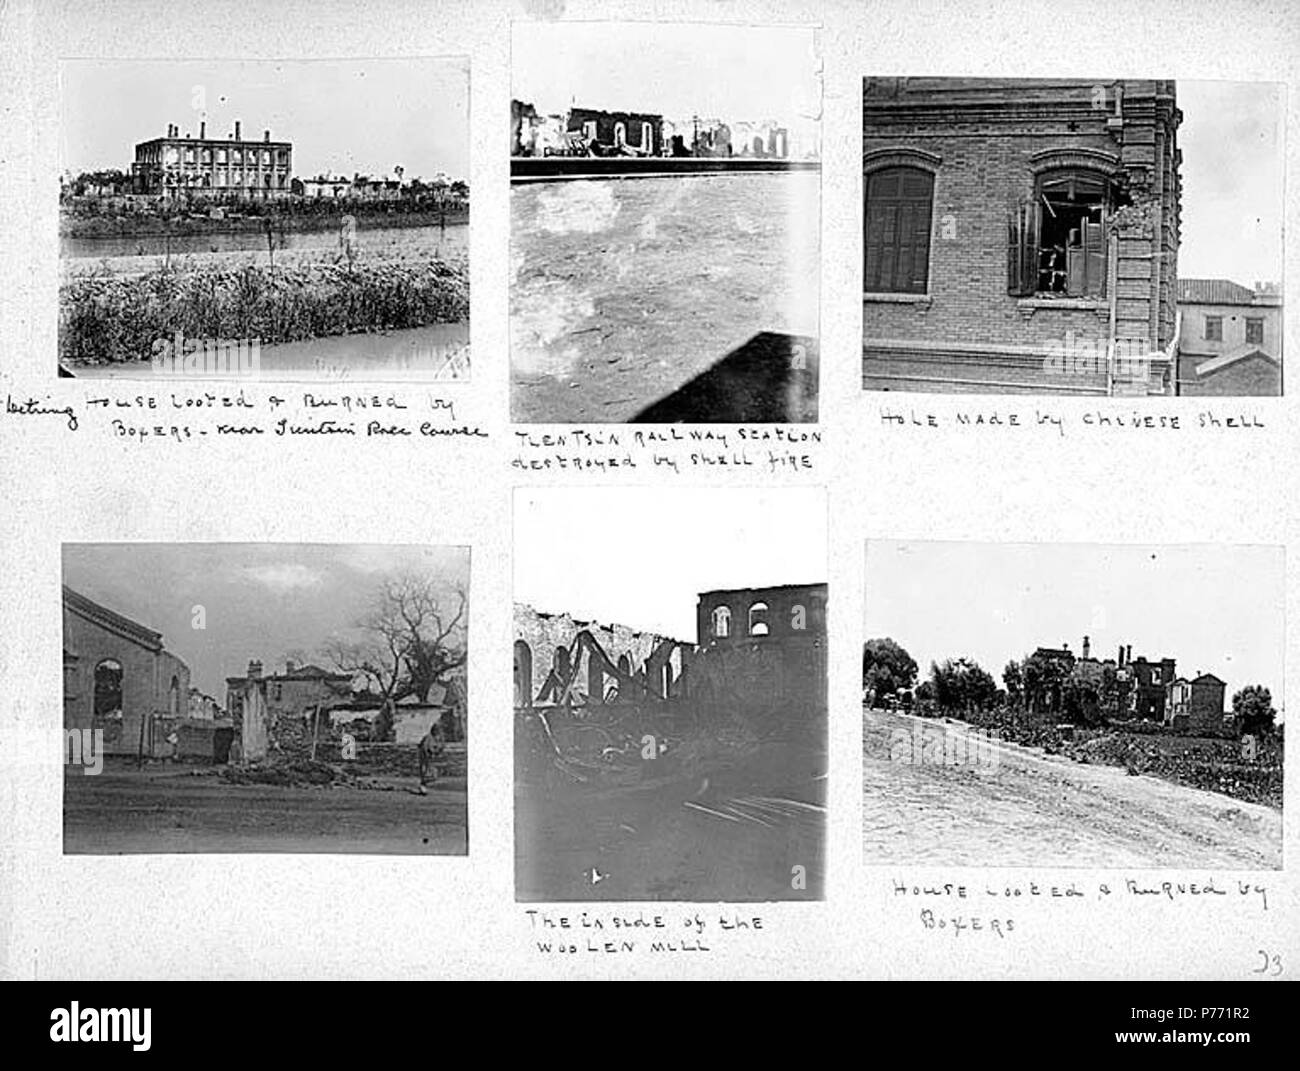 . English: 7.23 Damage to buildings by Boxers, Tientsin, ca. 1899-1901 . English: Captions on album page: House looted and burned by Boxers, near Tien Tsin race course; Tien Tsin Railway station destroyed by shell fire; Hole made by Chinese shell; The inside of the woolen mill; House looted and burned by Boxers . PH Coll 241.B23a-f Subjects (LCTGM): War damage--China--Tianjin Subjects (LCSH): China--History--Boxer Rebellion, 1899-1901--Destruction and pillage; Buildings--War damage--China--Tianjin; Railroad stations--War damage--China--Tianjin; Tianjin (China)--Buildings, structures, etc.  . c Stock Photo